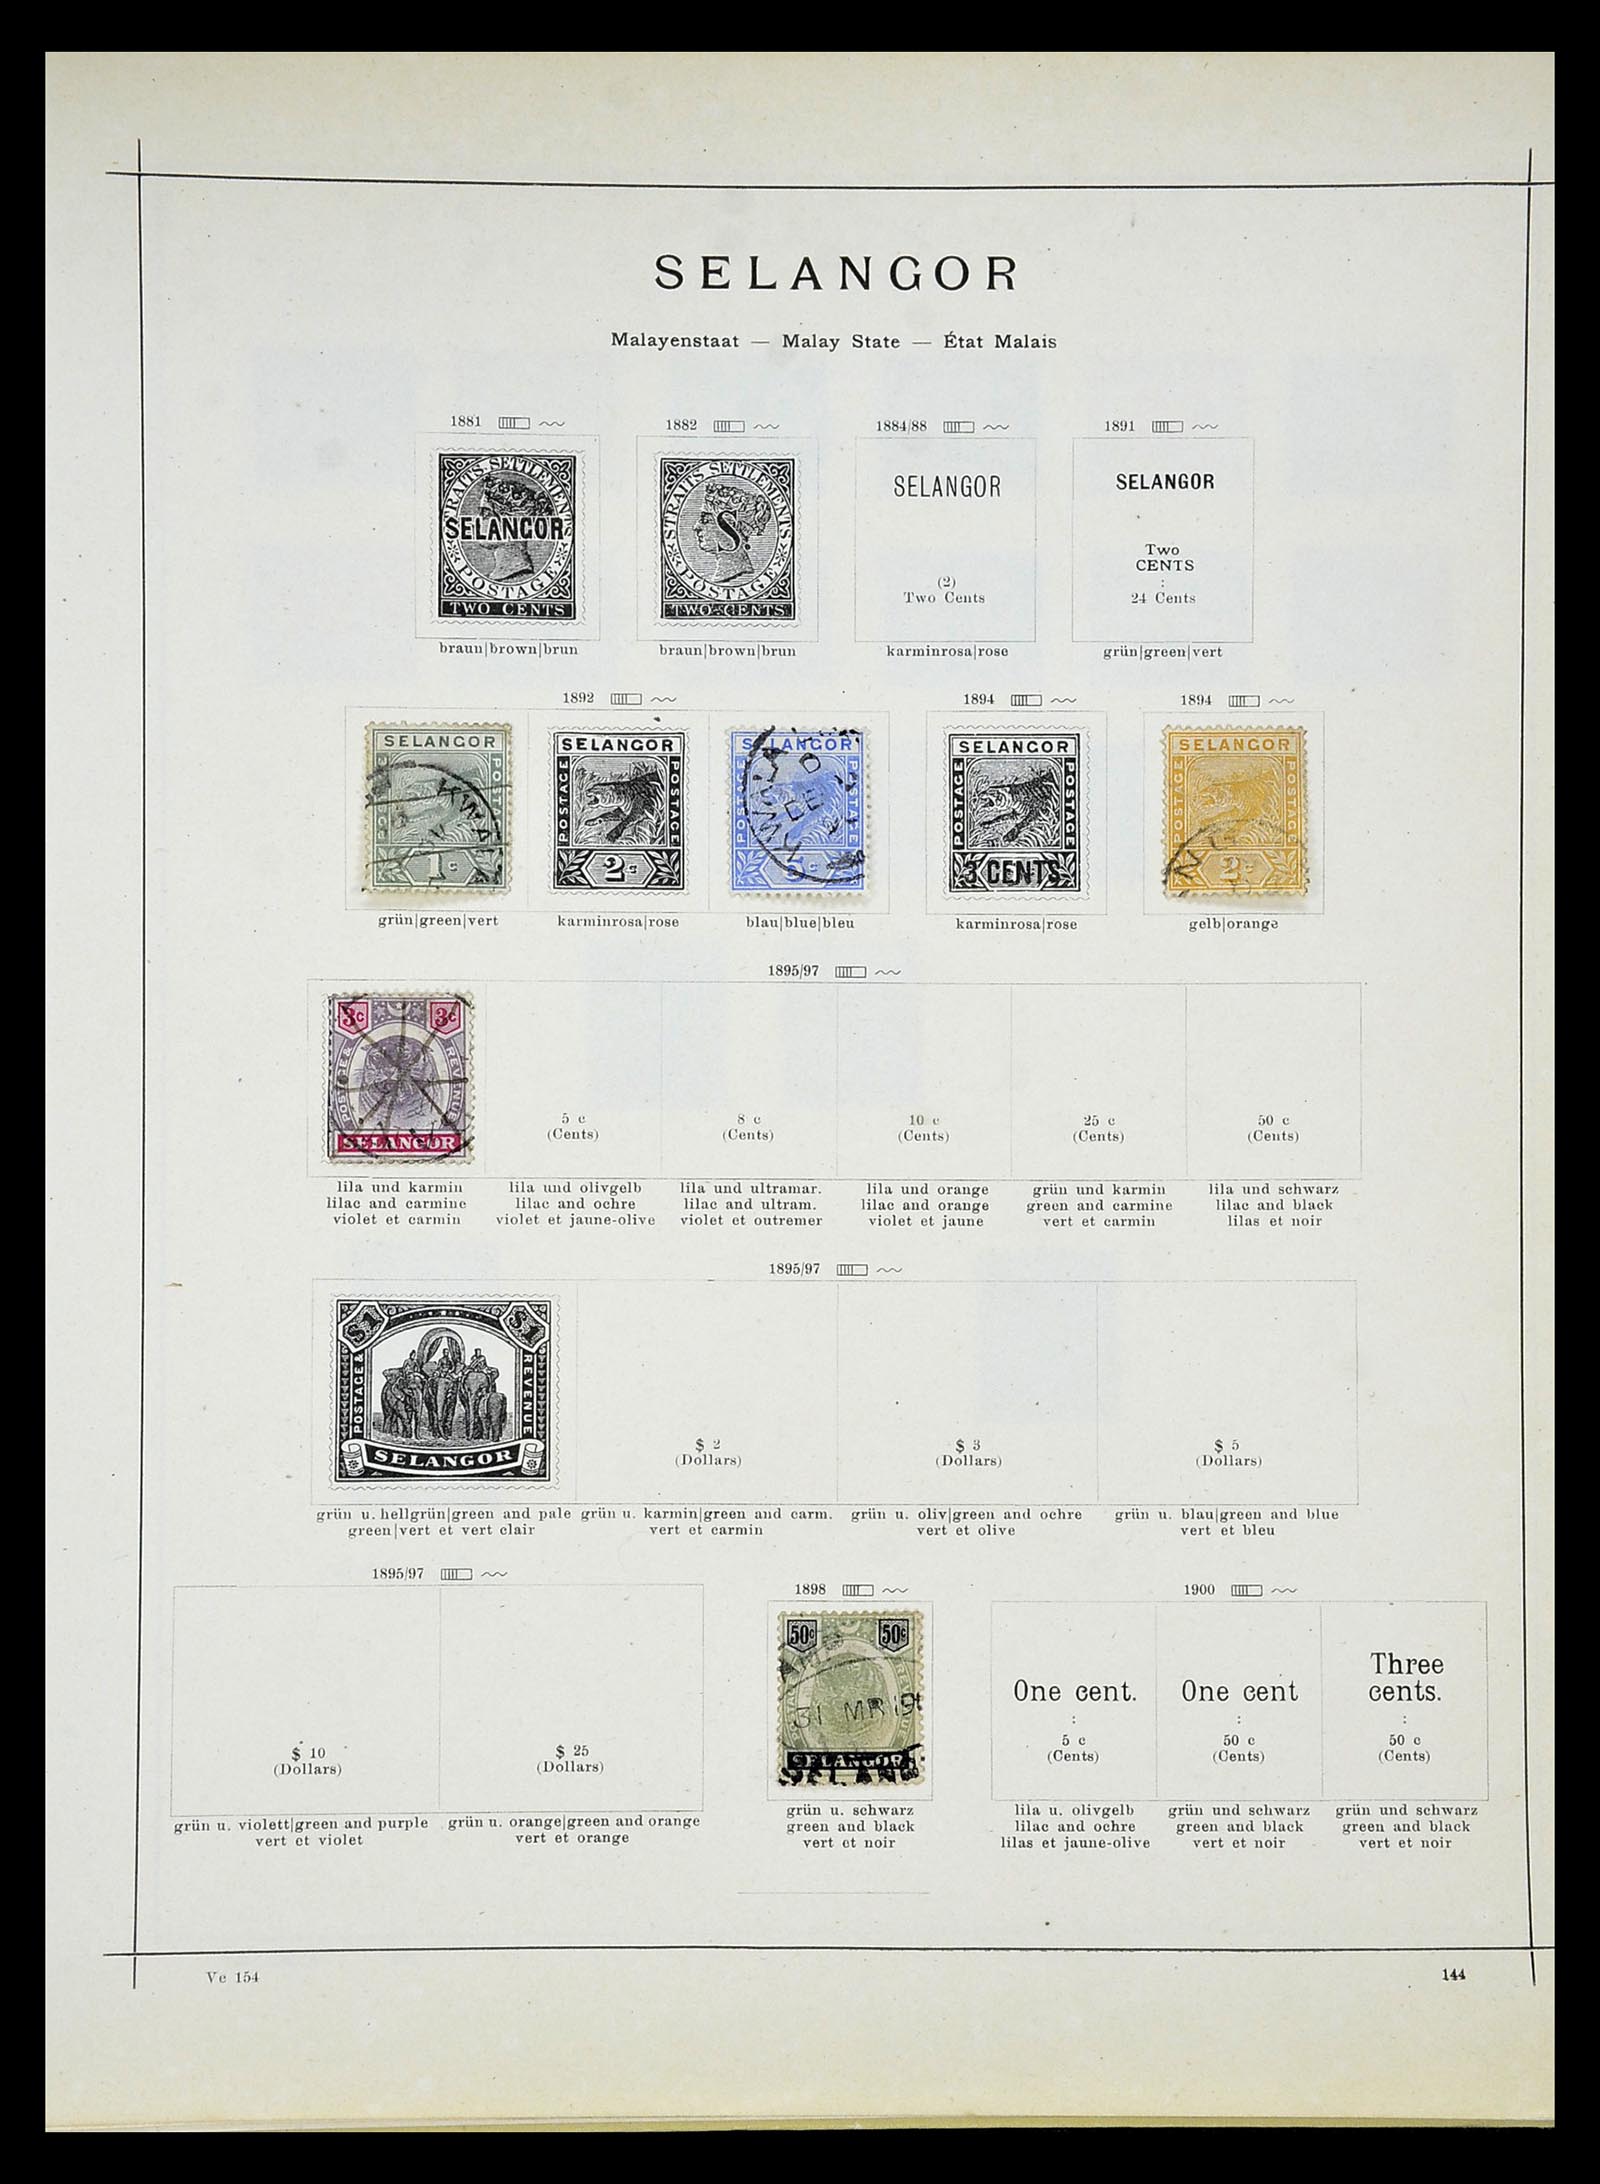 34892 029 - Stamp Collection 34892 Straits Settlements, Malaysia and Singapore 1868-